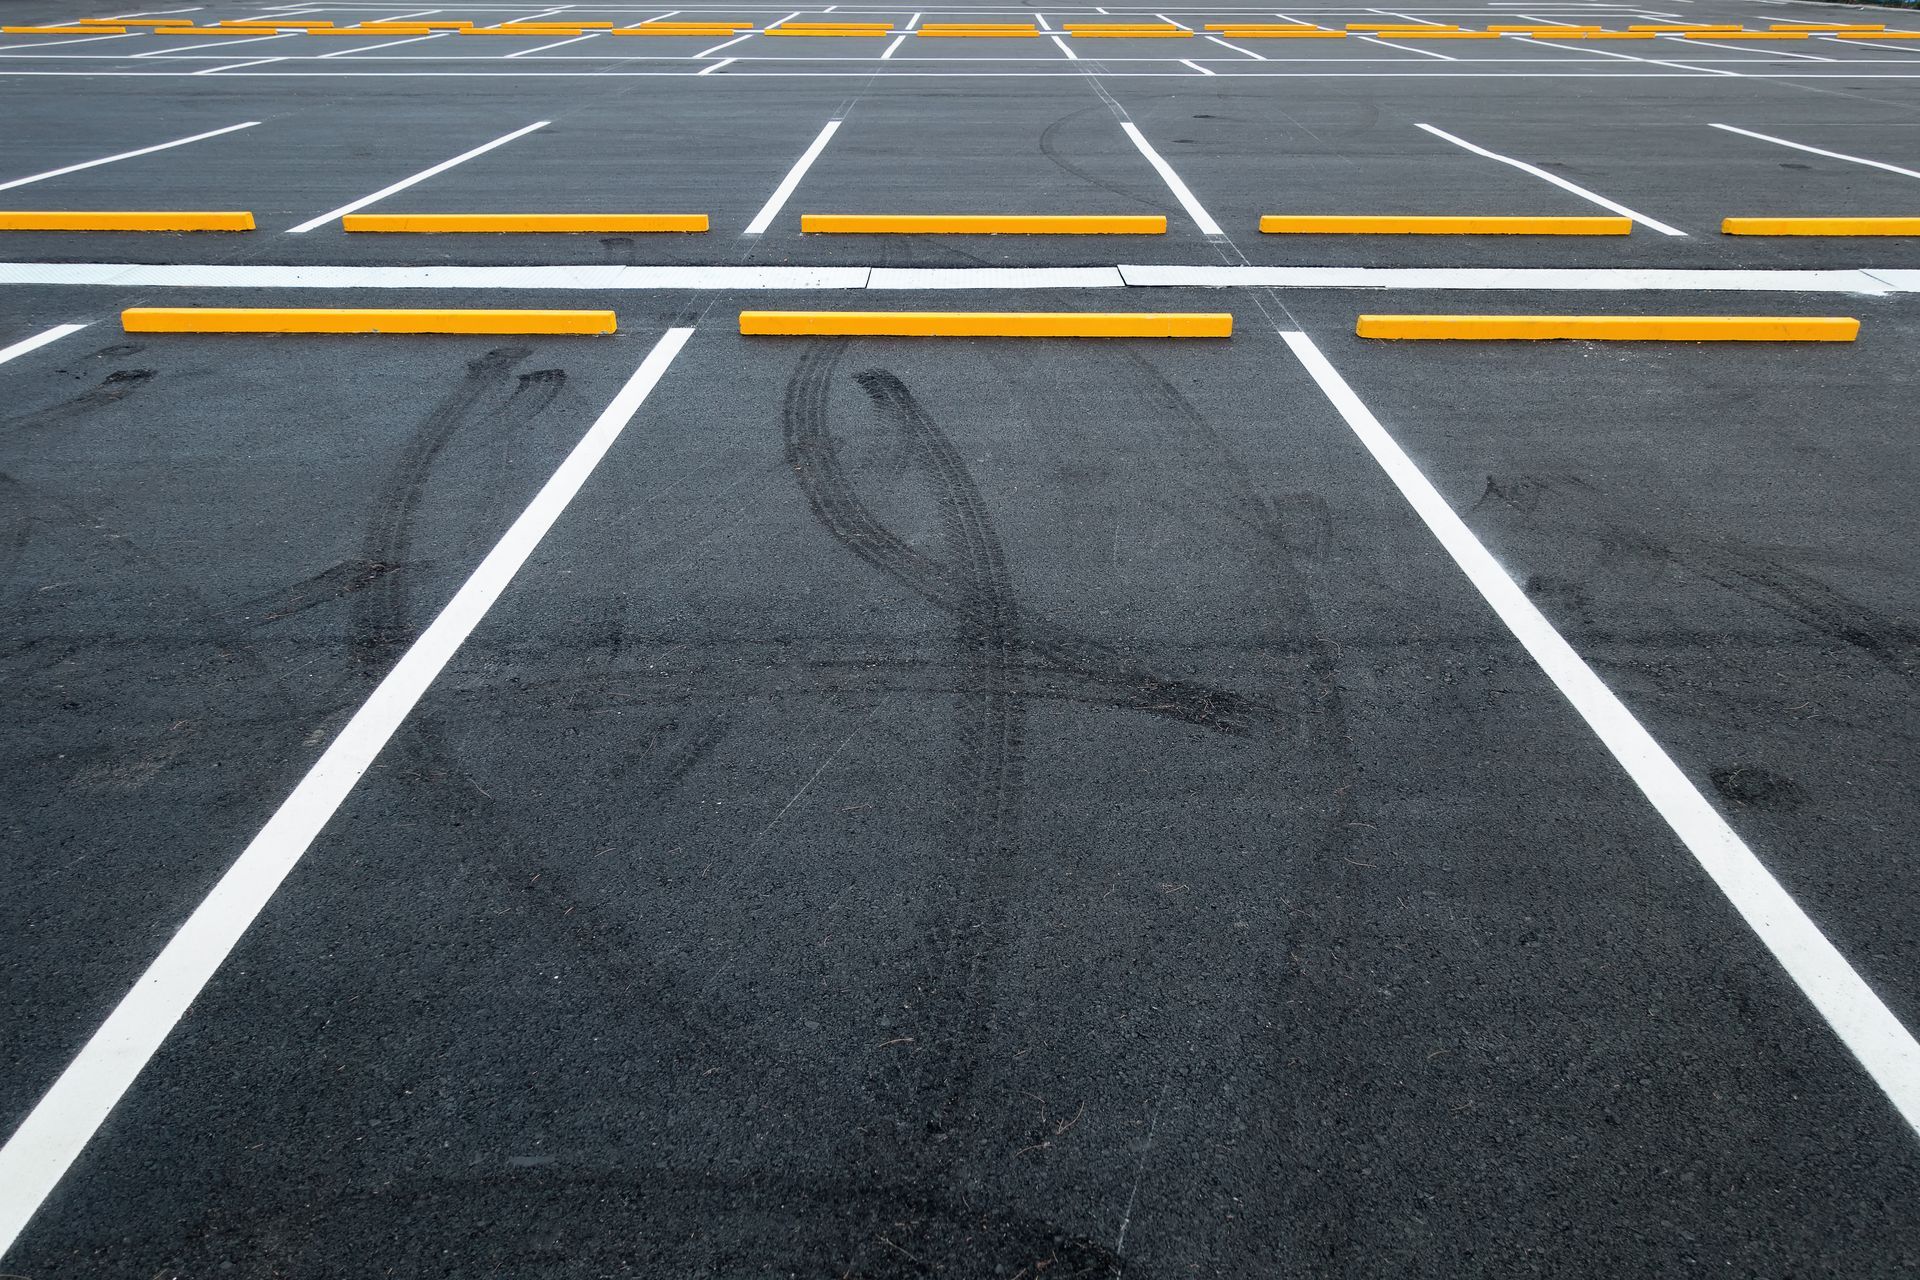 Empty car parking lots with marked parking spaces, located in an outdoor public parking area.